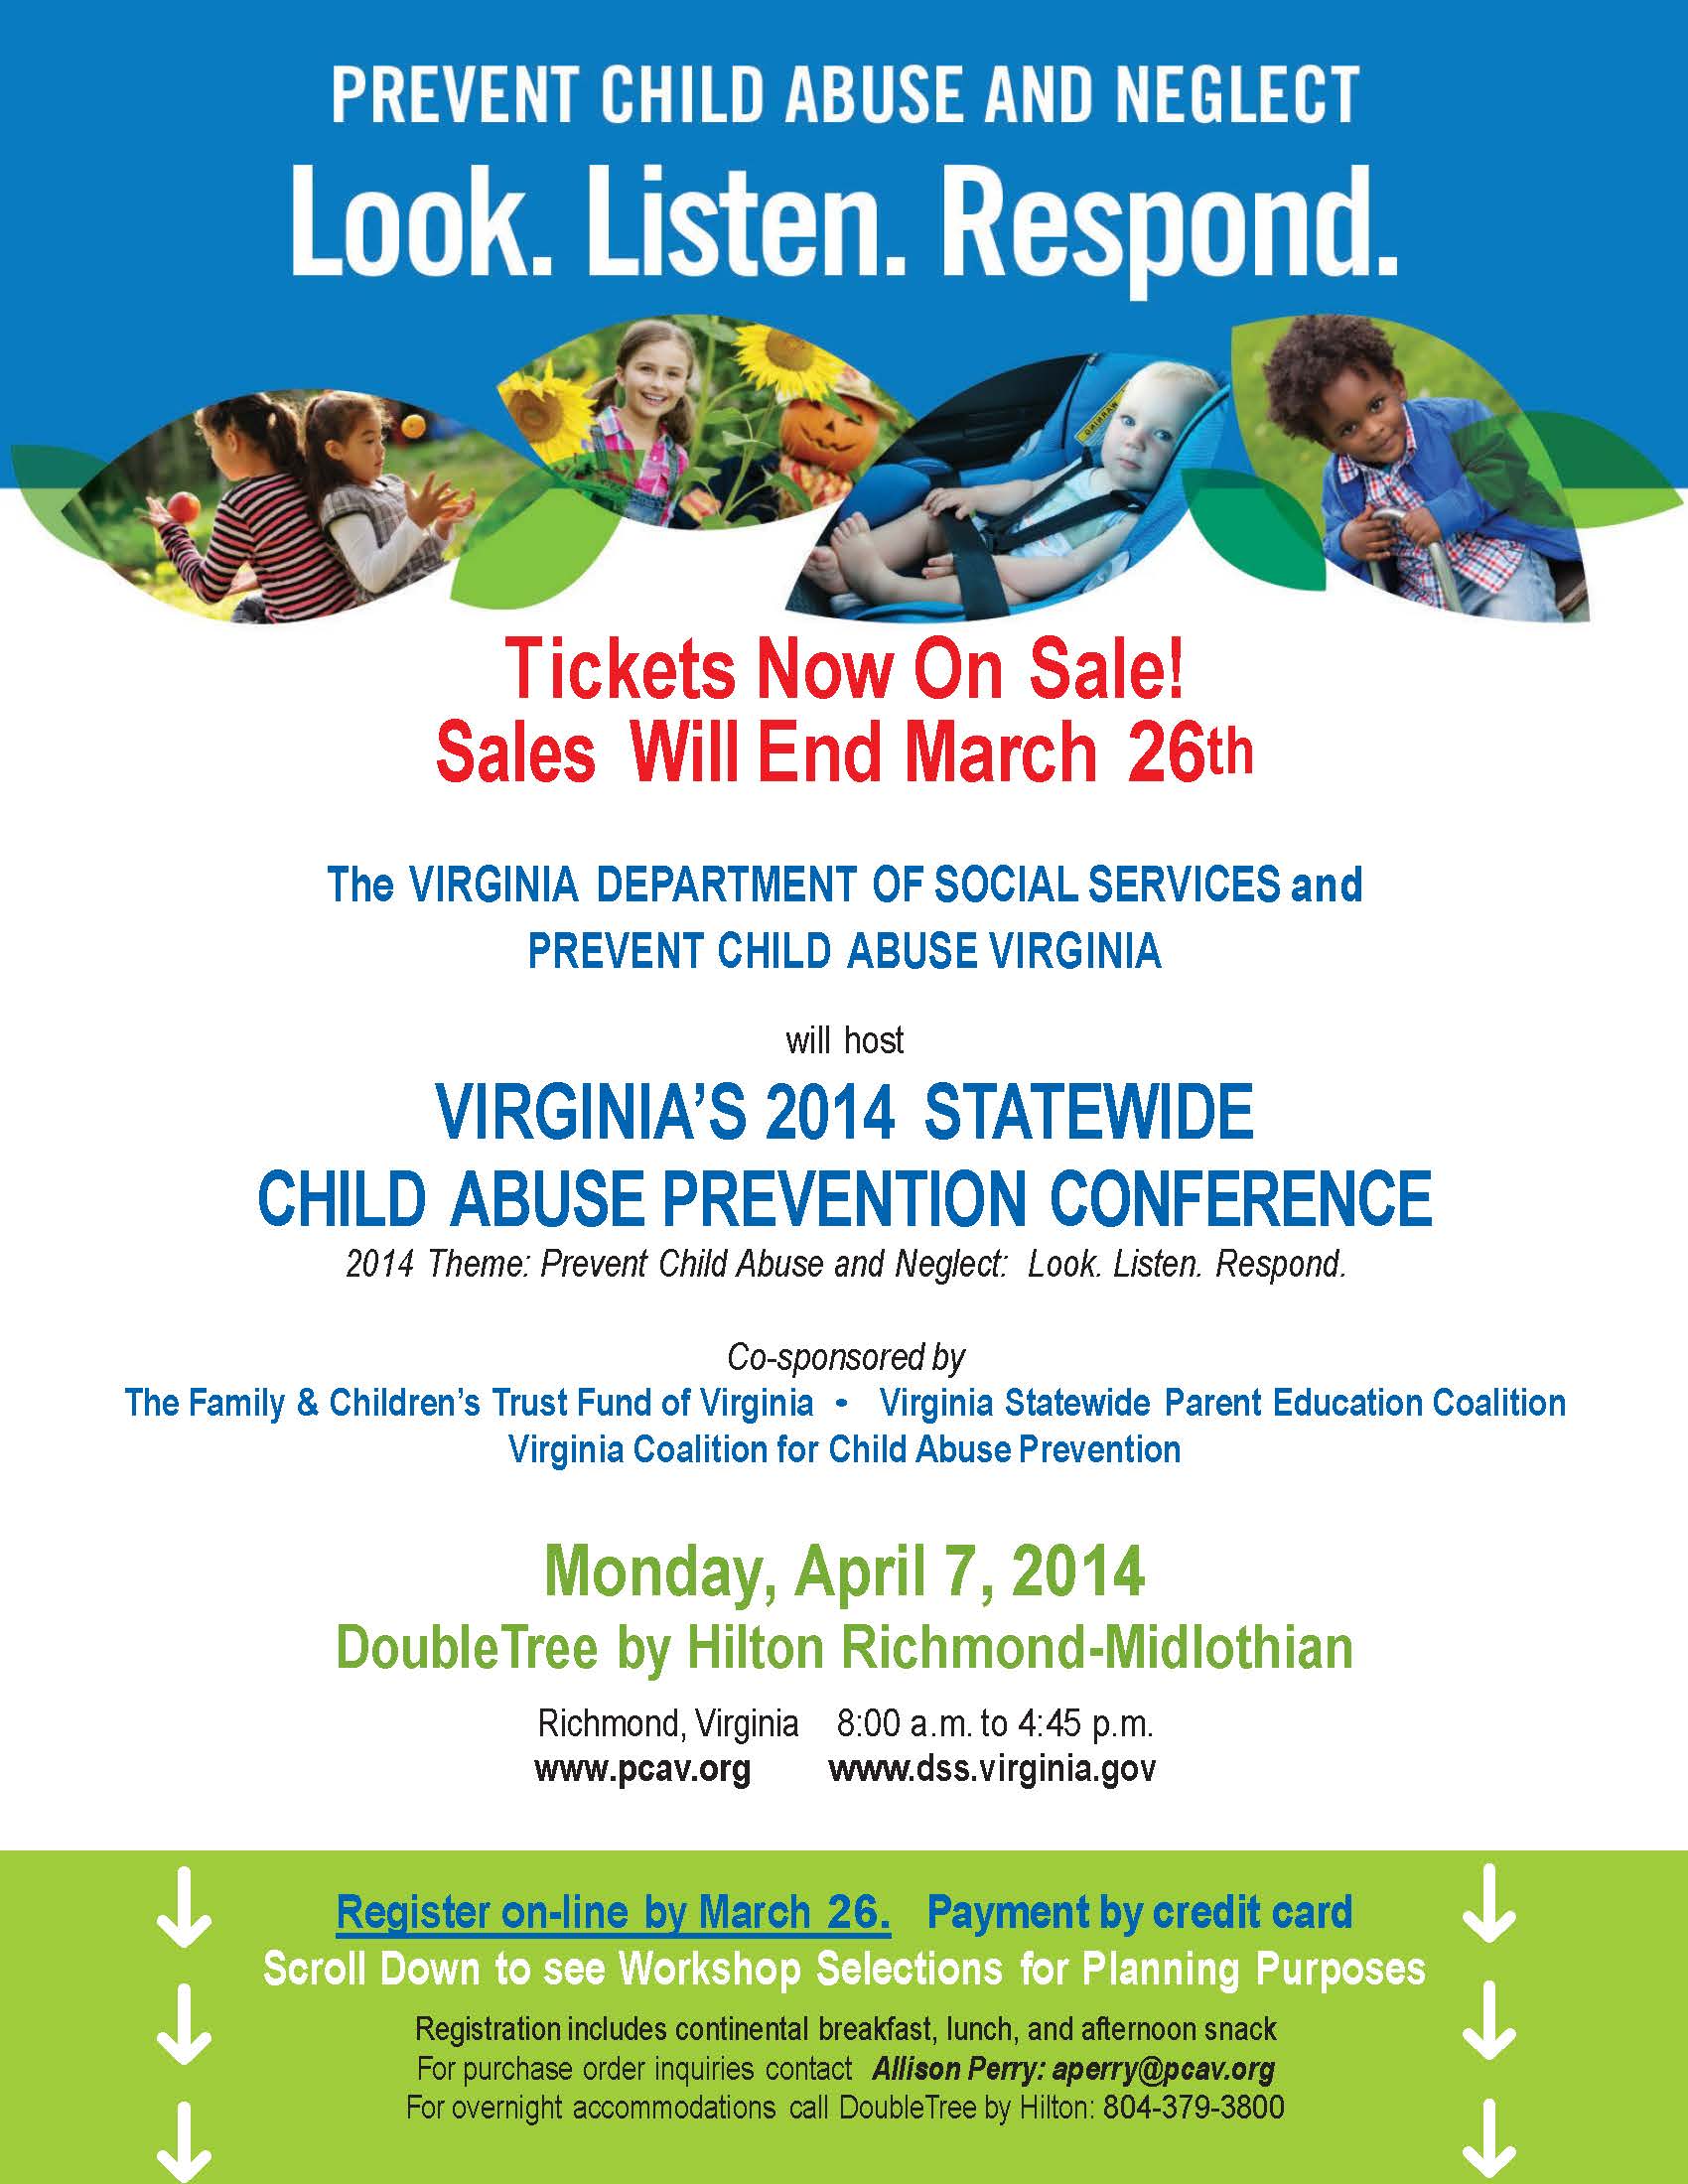 VIRGINIA’S CHILD ABUSE PREVENTION CONFERENCE Tickets, Mon, Apr 7, 2014 ...